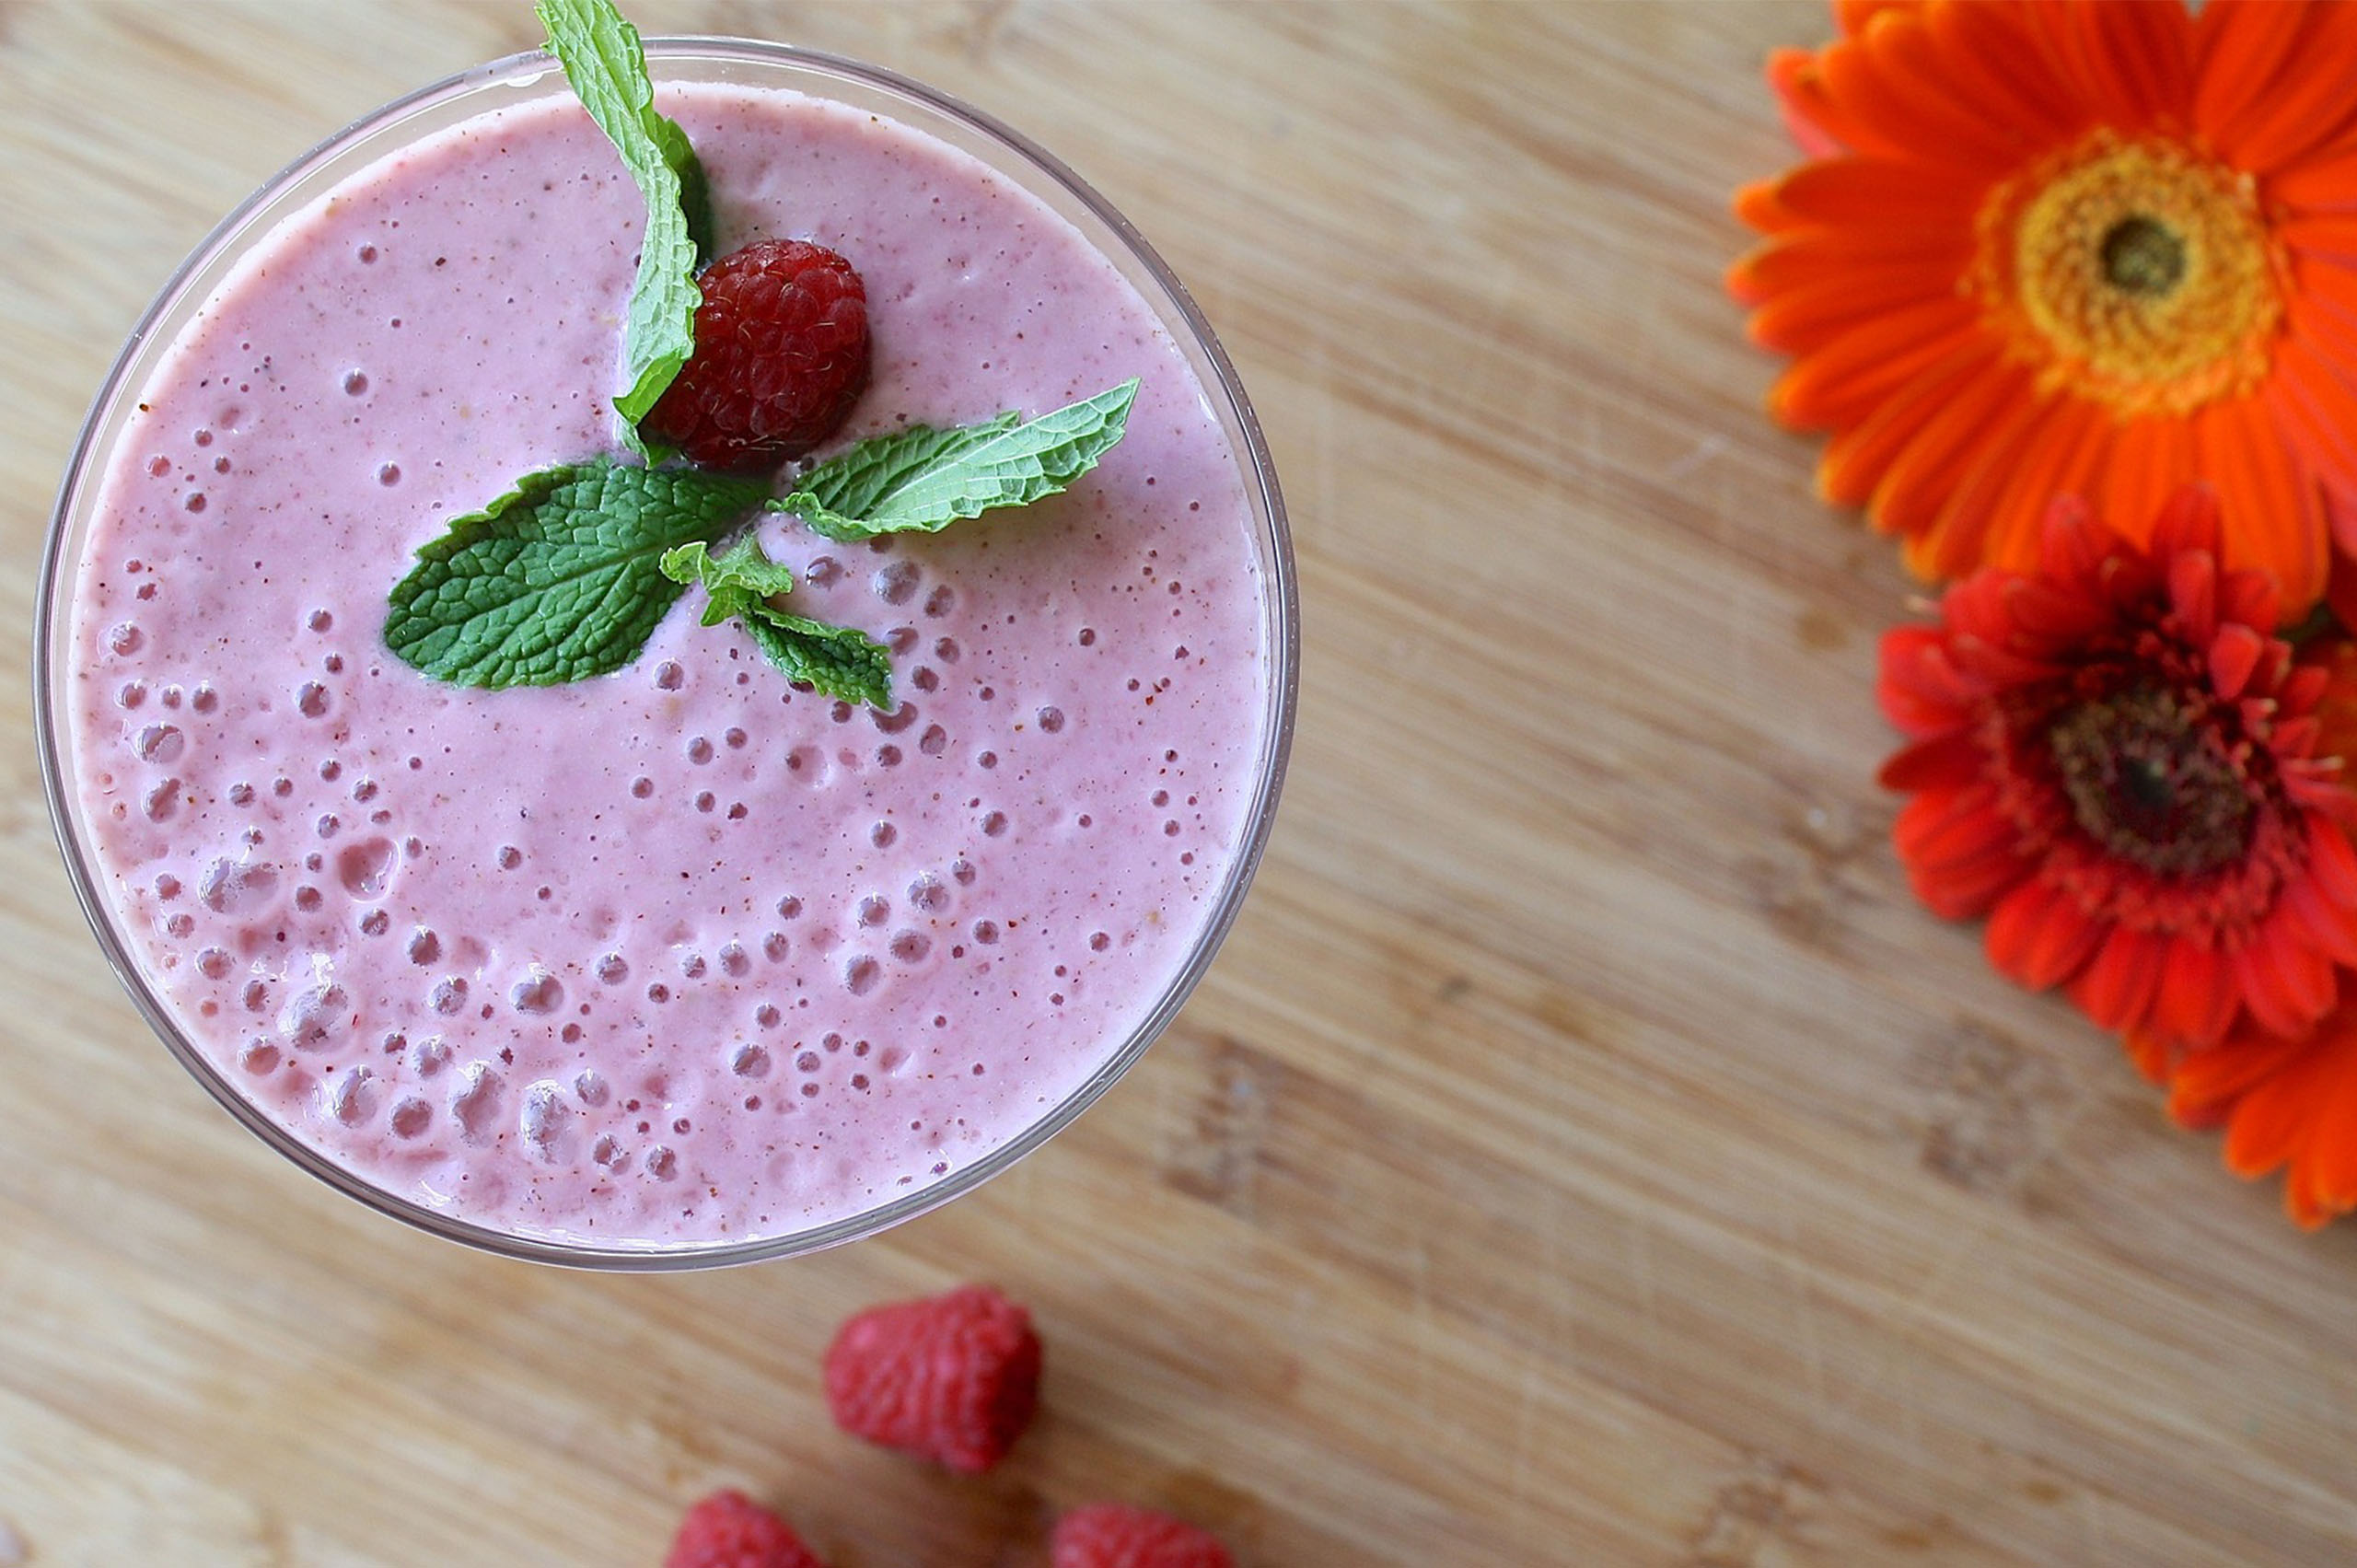 This berry smoothie makes for a better breakfast